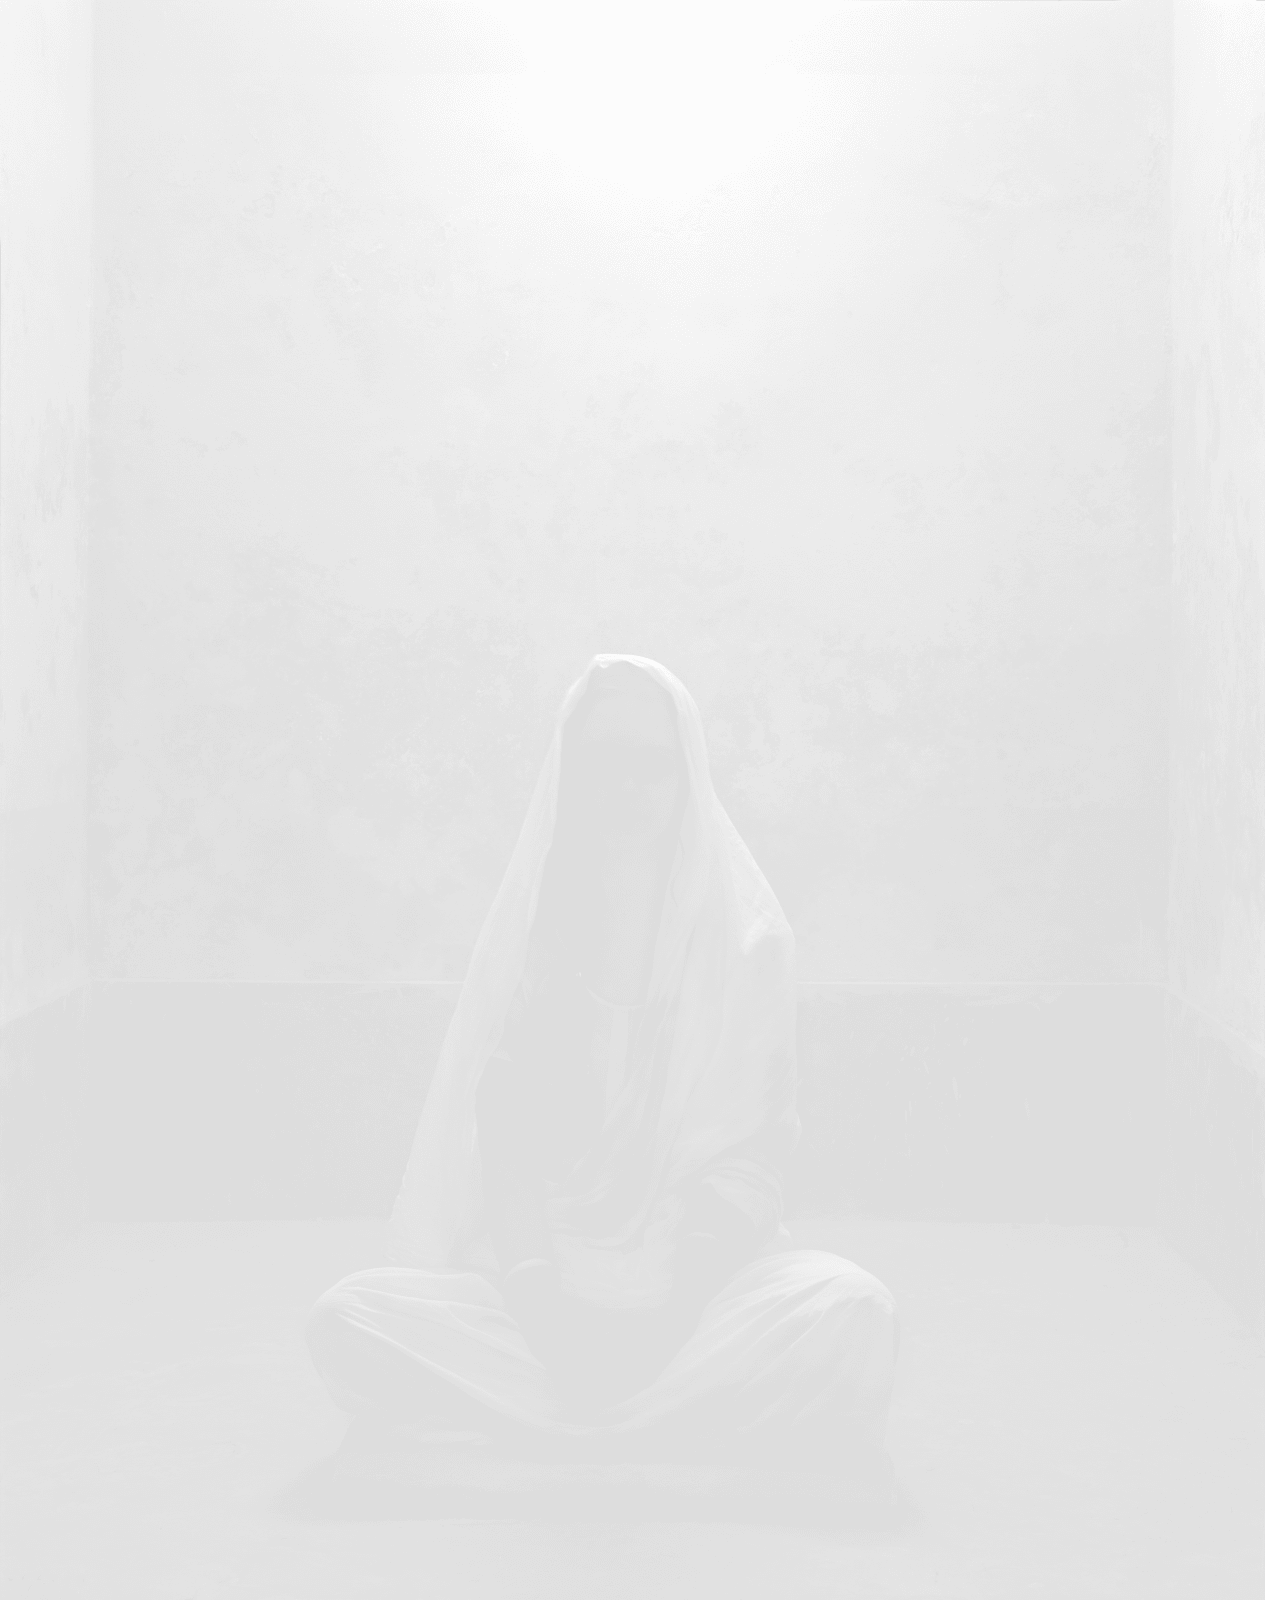 Danielle Nelson Mourning White Meditation (Rishikesh, India) 2009 Archival ink print 47 x 59 in, 3 of 3 $7,500